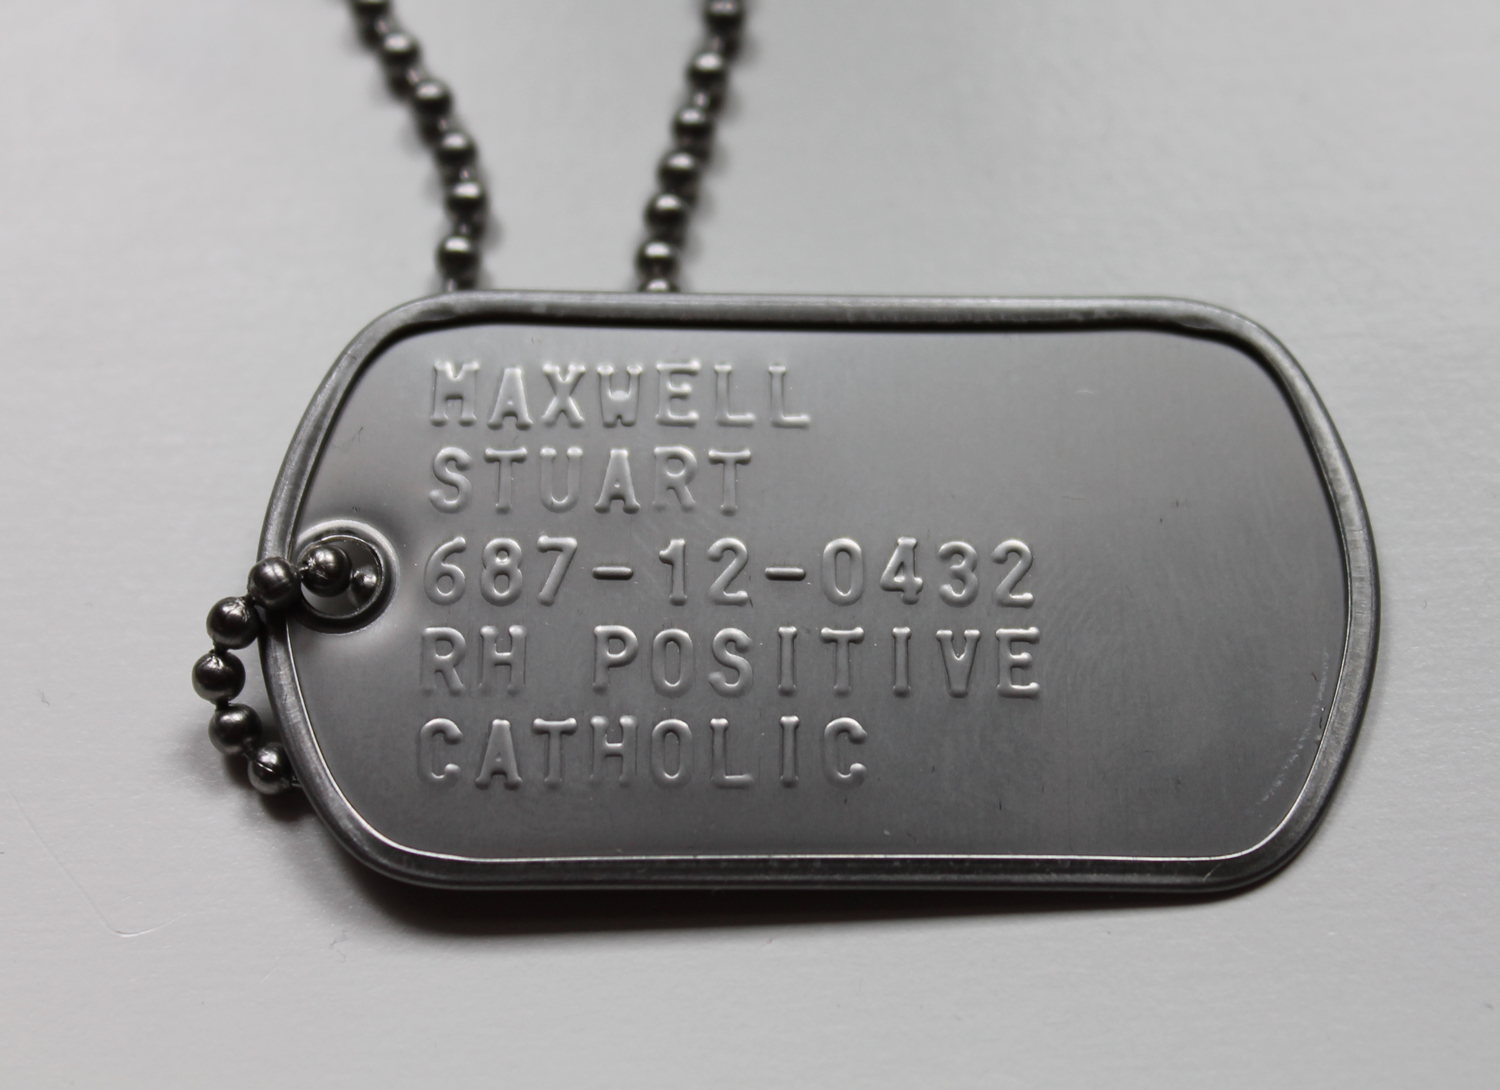 What Are Dog Tags Used For In The Military